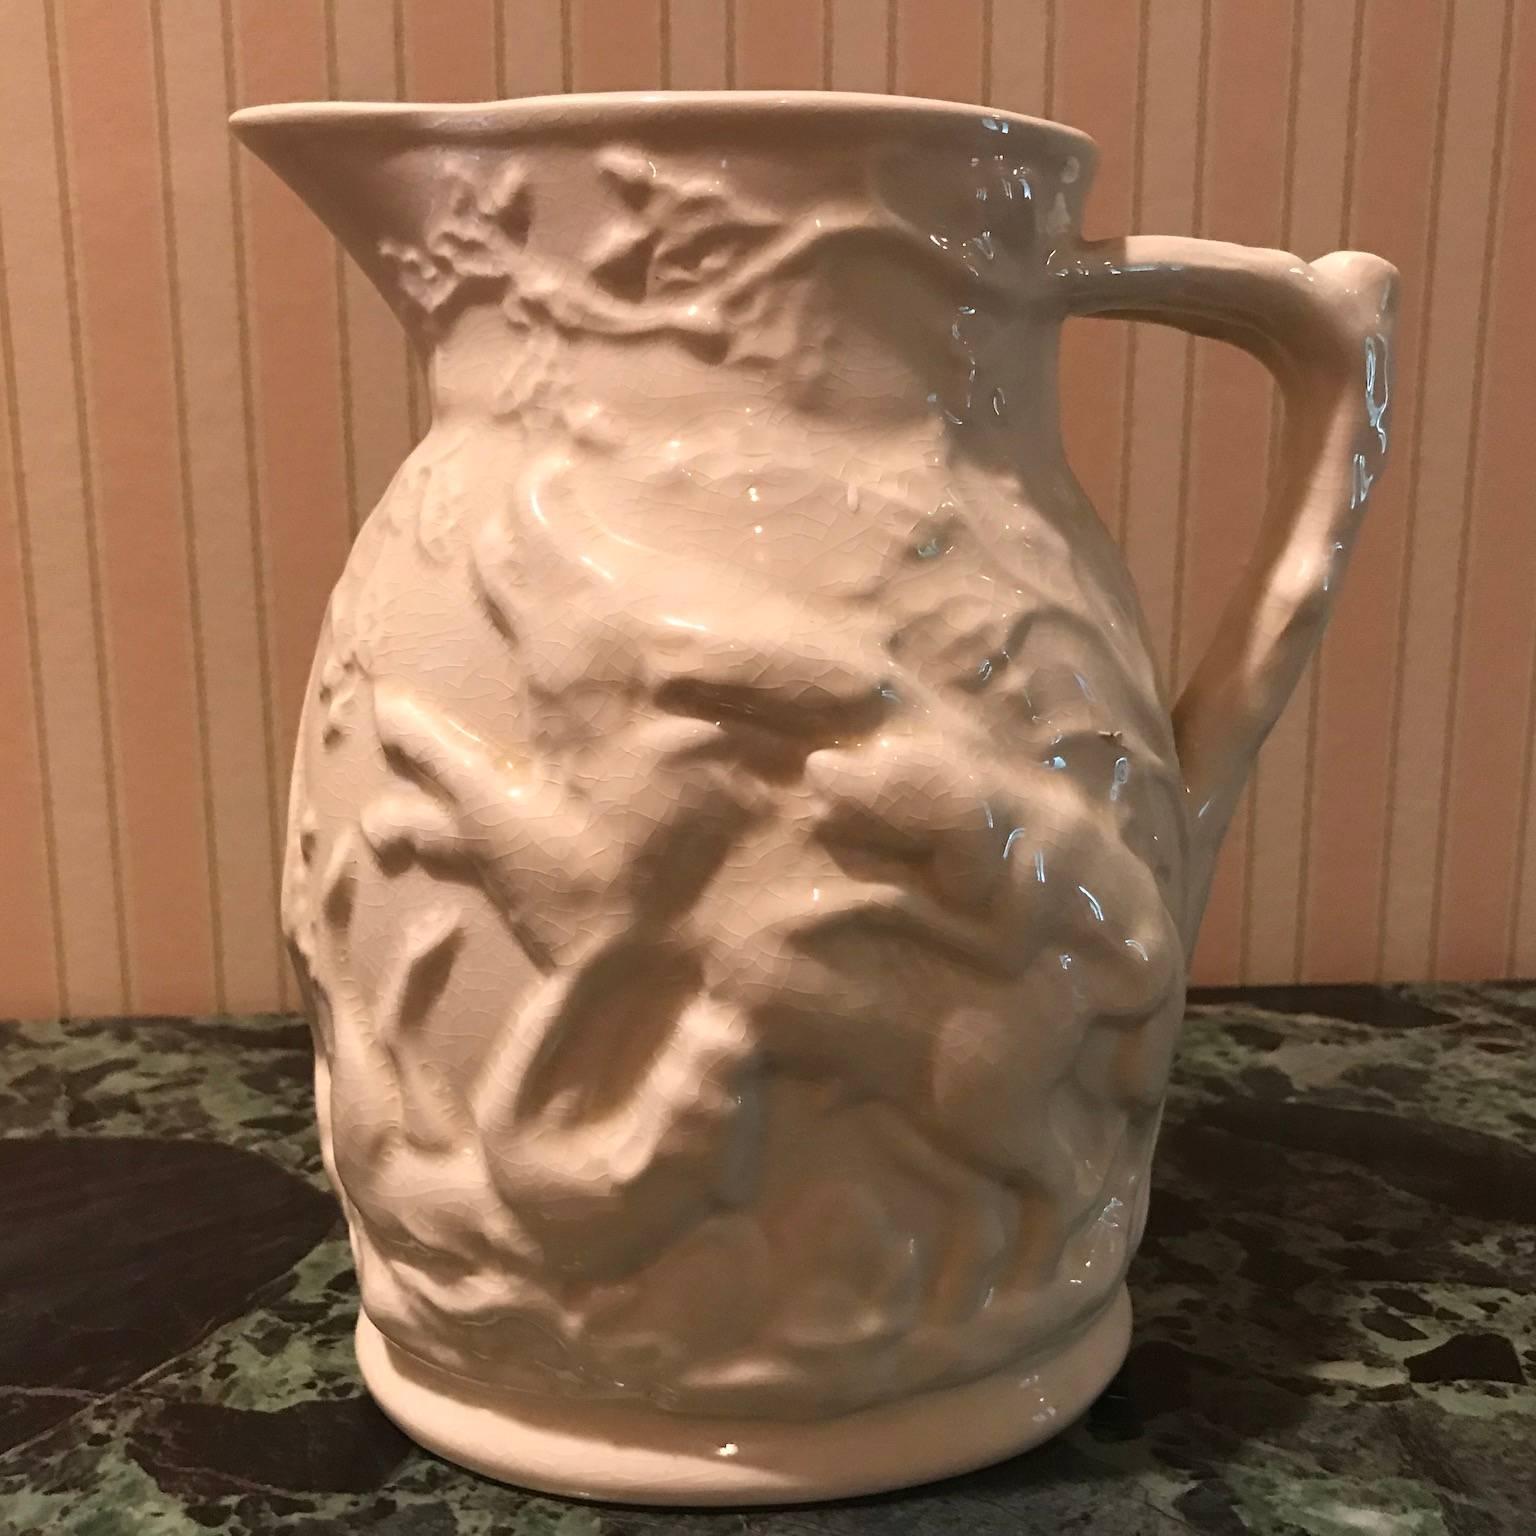 Lot of four porcelain relief pitchers, each decorated with scenes. Measures: 1). 8